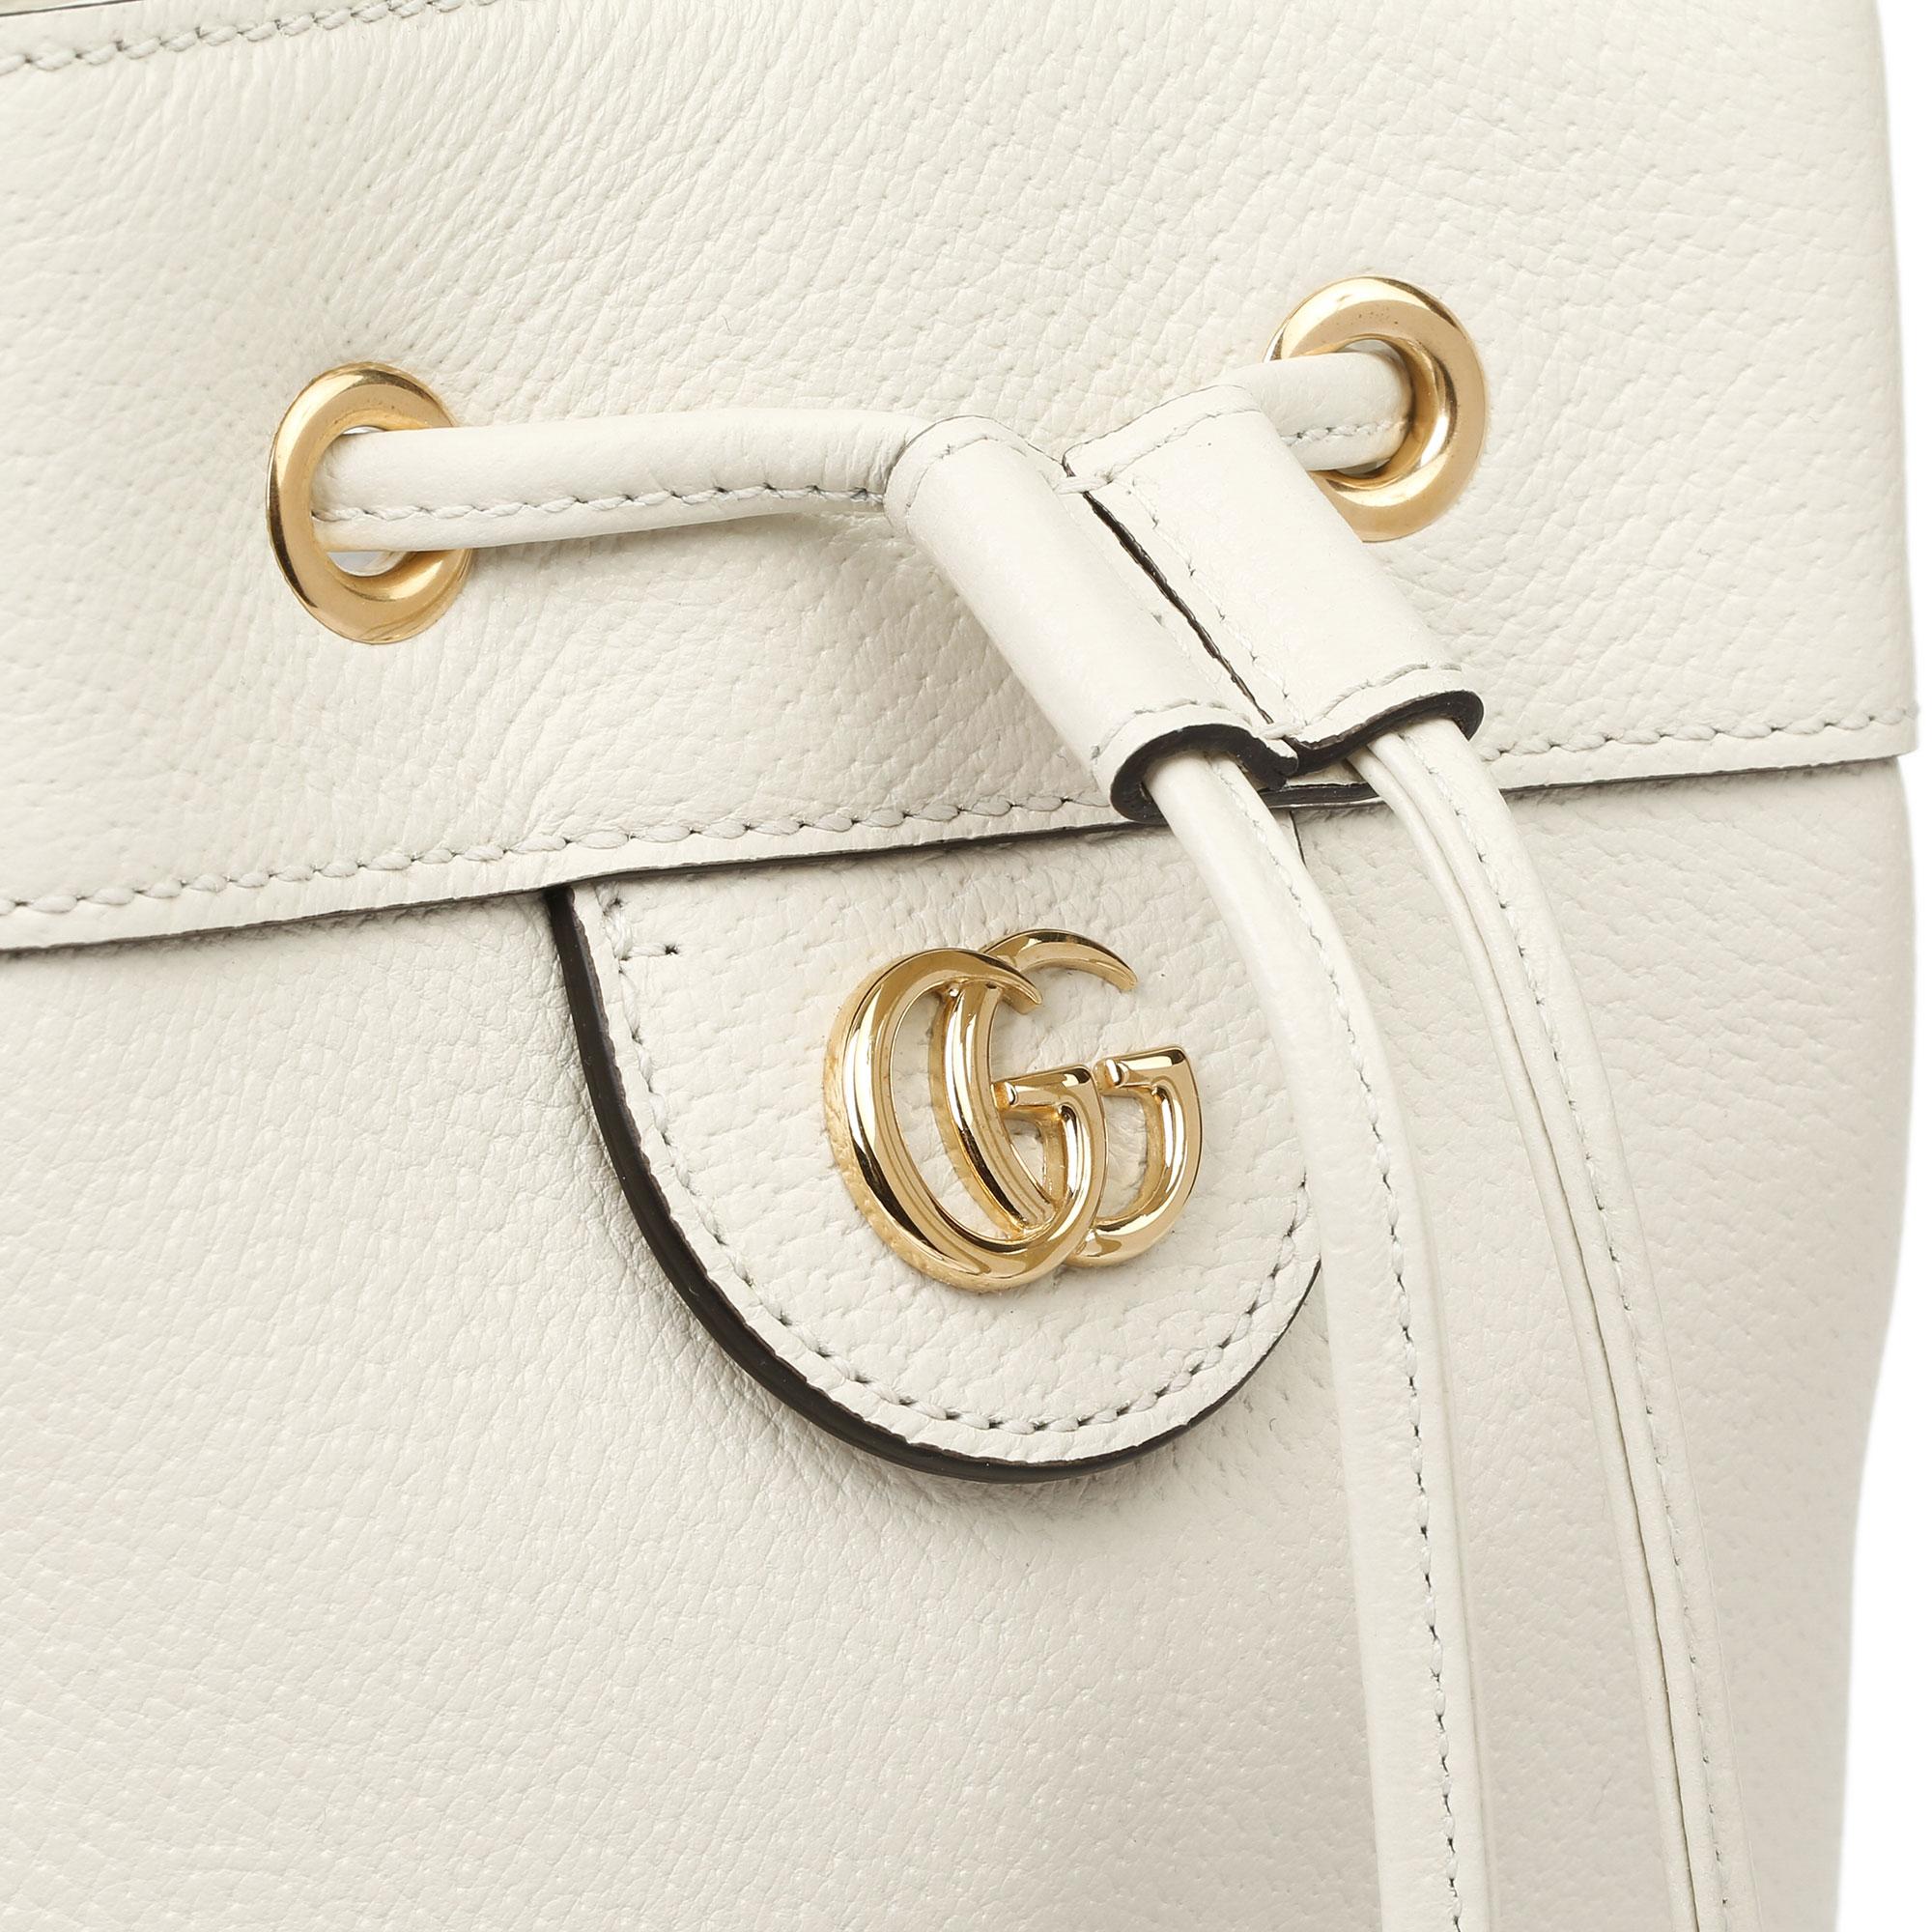 2021 Gucci White Pigskin Leather Web Orphidia Bucket Bag 3